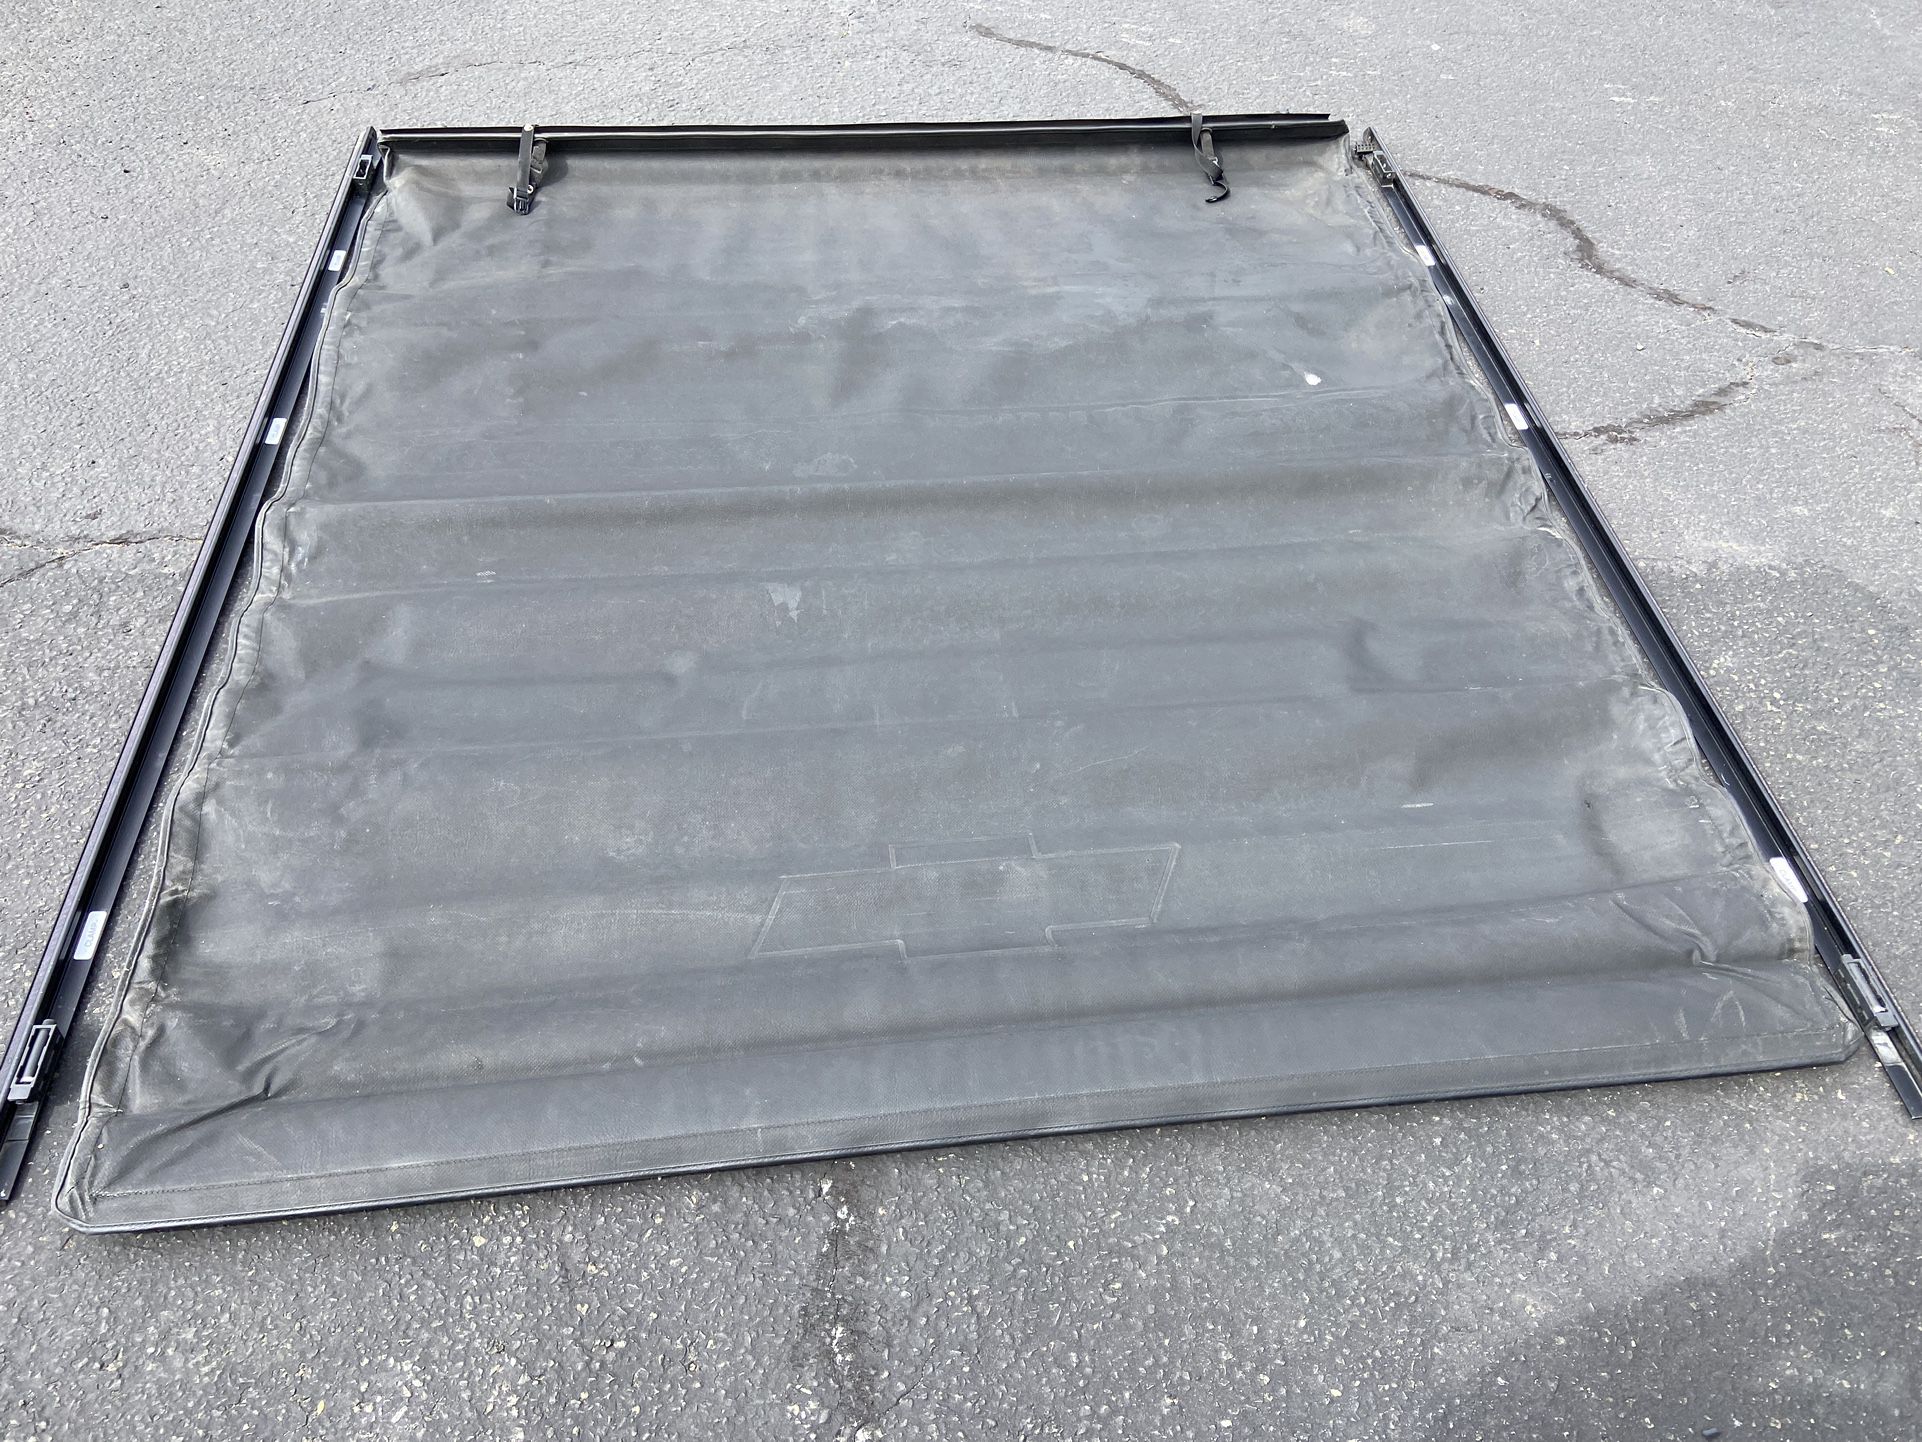 Soft Cover Cargo Cover For 6.5 Truck Bed I Think It Came Off A Chevy But Fits A Ford Too